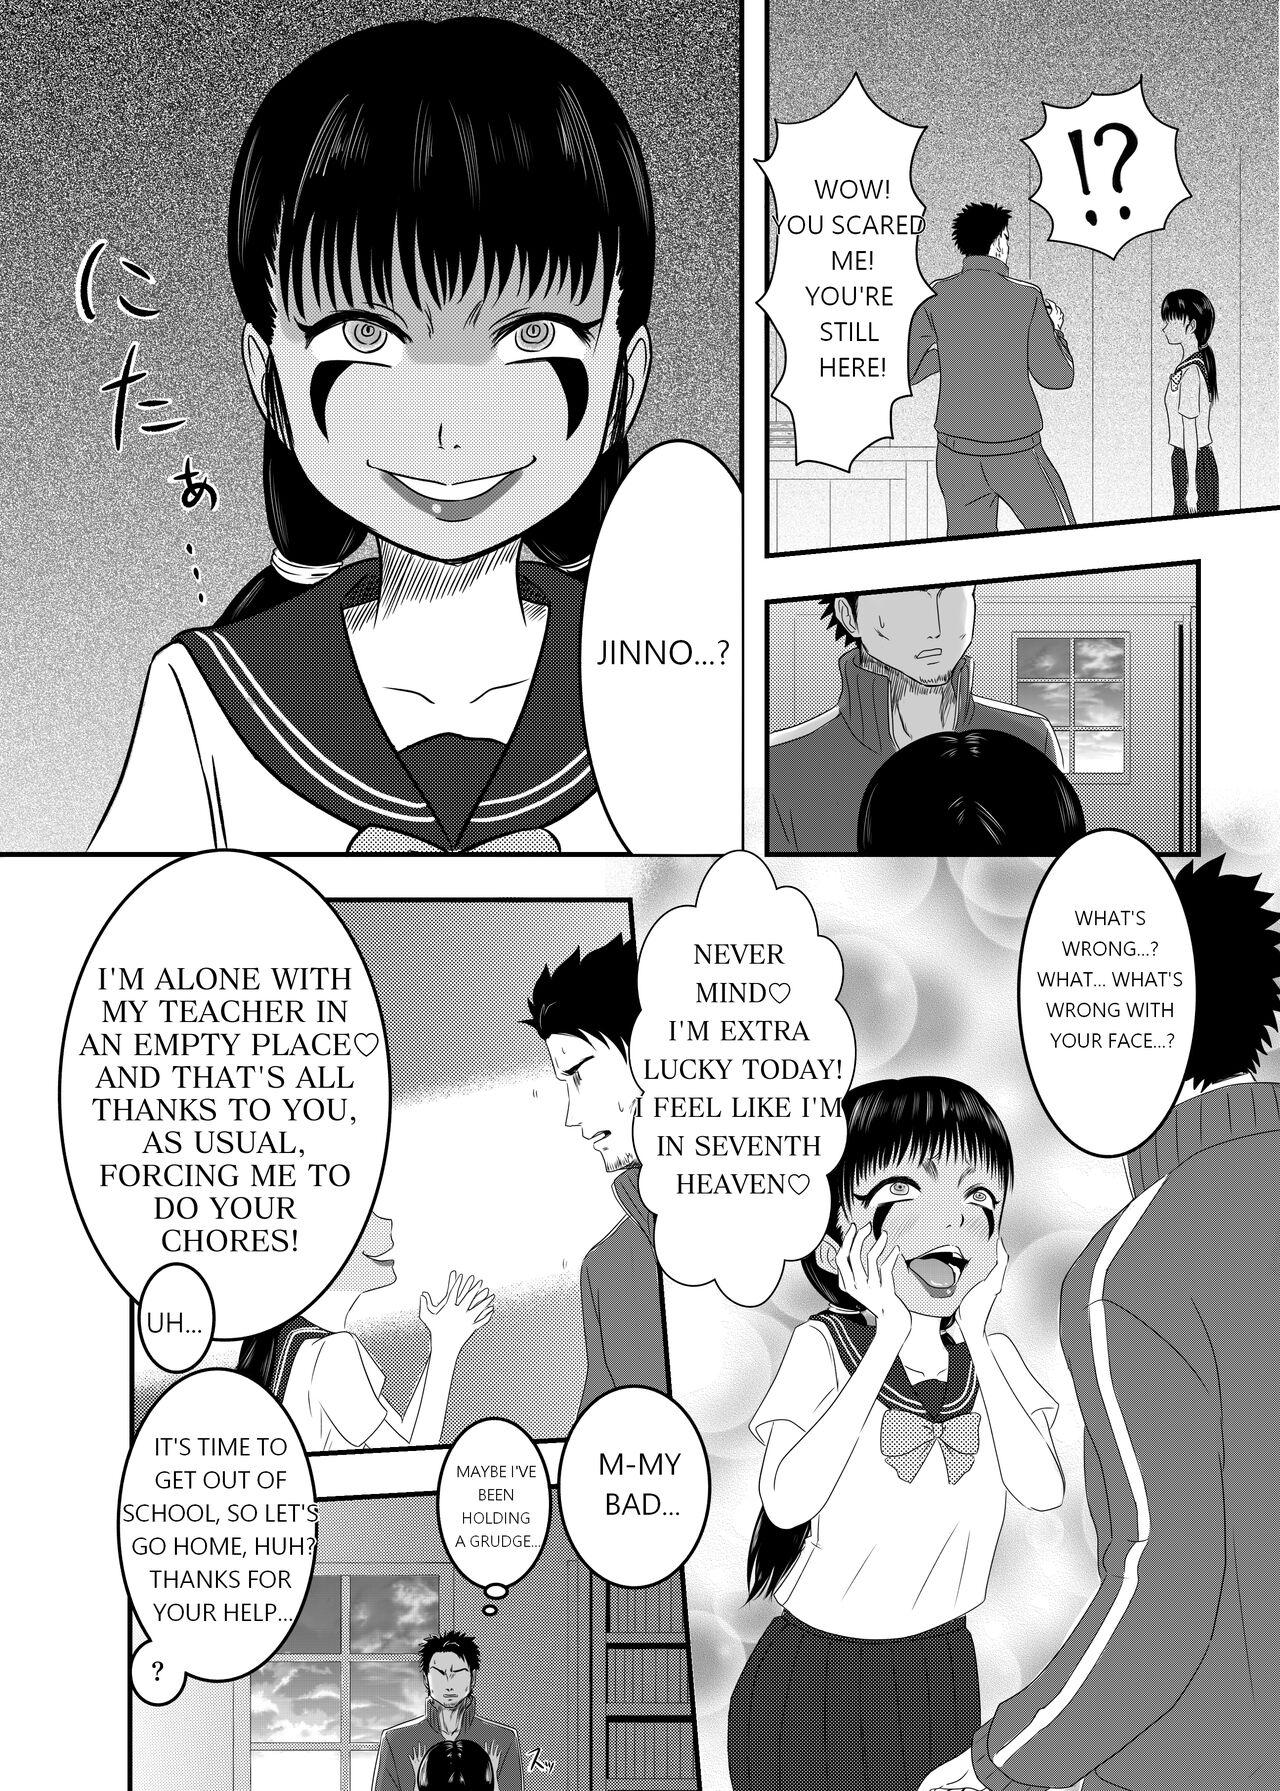 1080p The Evil Mask 1 - The mask 4some - Page 10